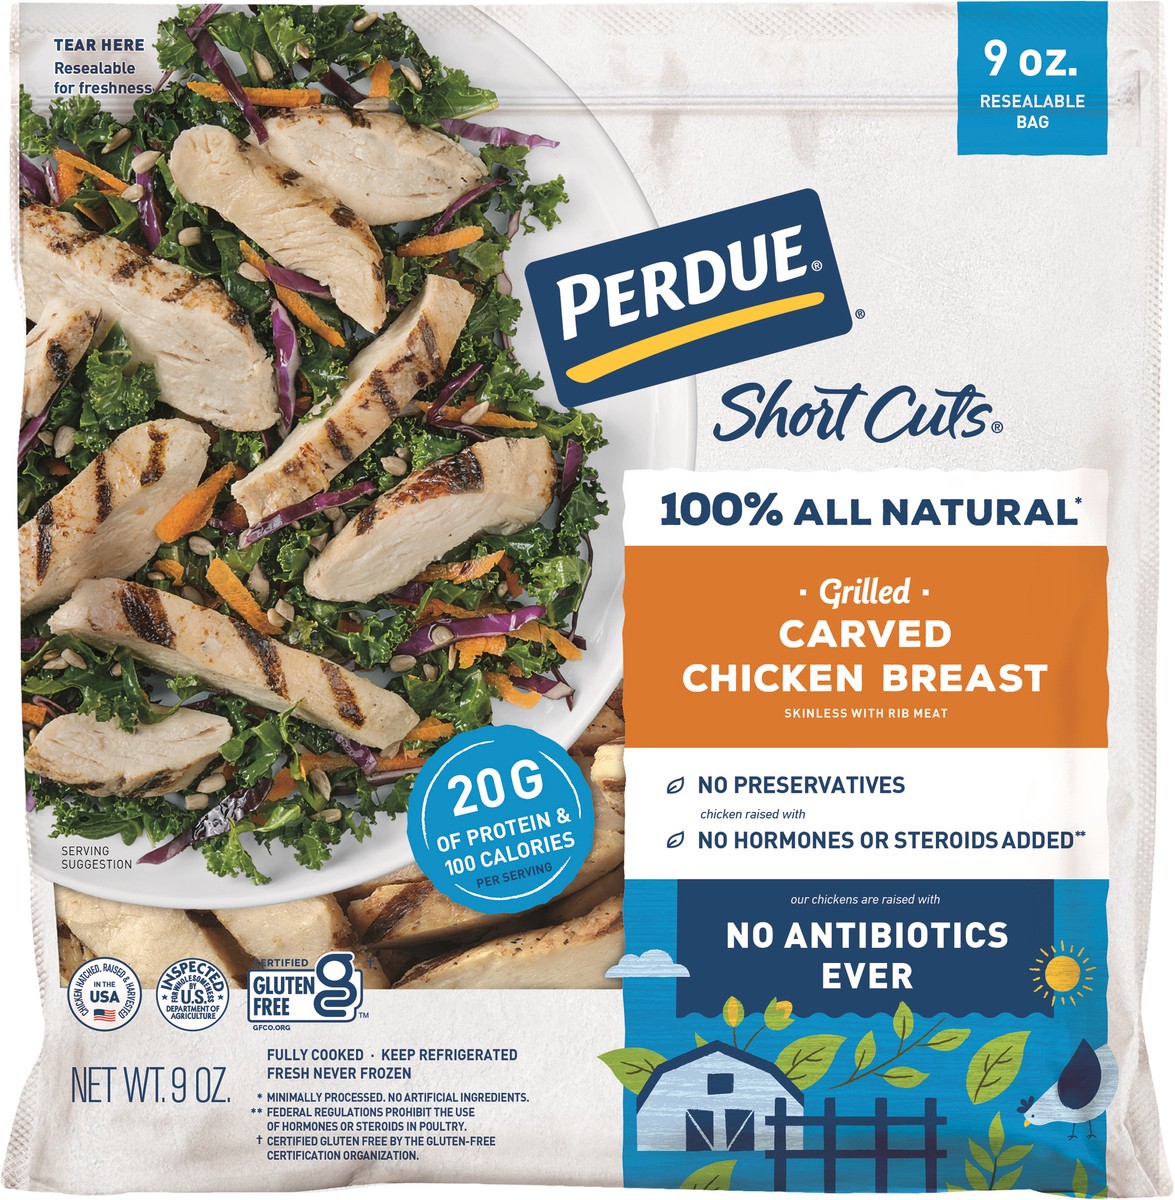 slide 8 of 8, Perdue Short Cuts Grilled Carved Chicken Breast 9 oz, 8 oz